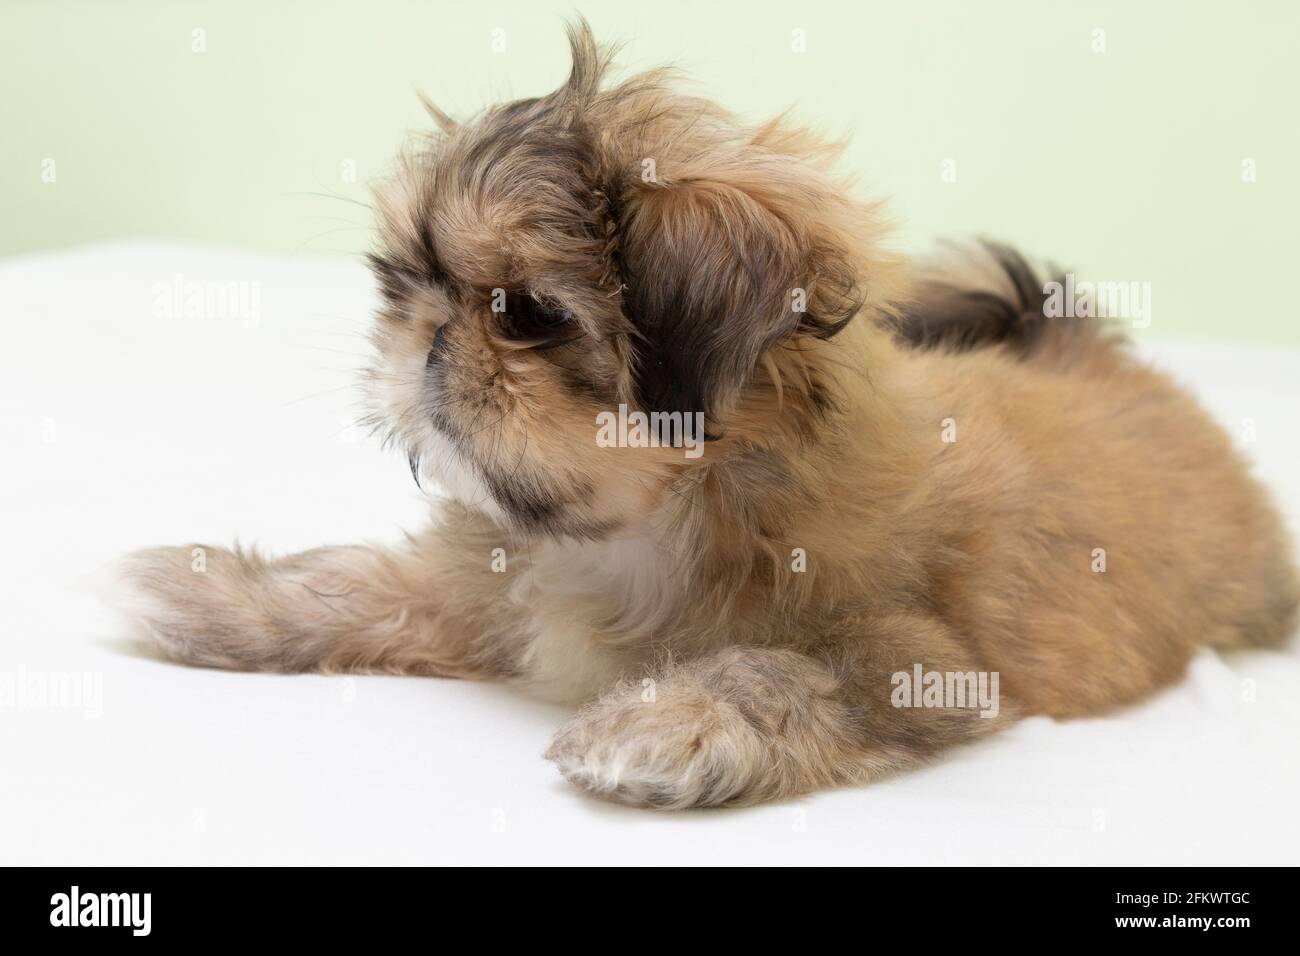 Puppy of the breed Pekingese puppy of the breed playing on the bed. Stock Photo